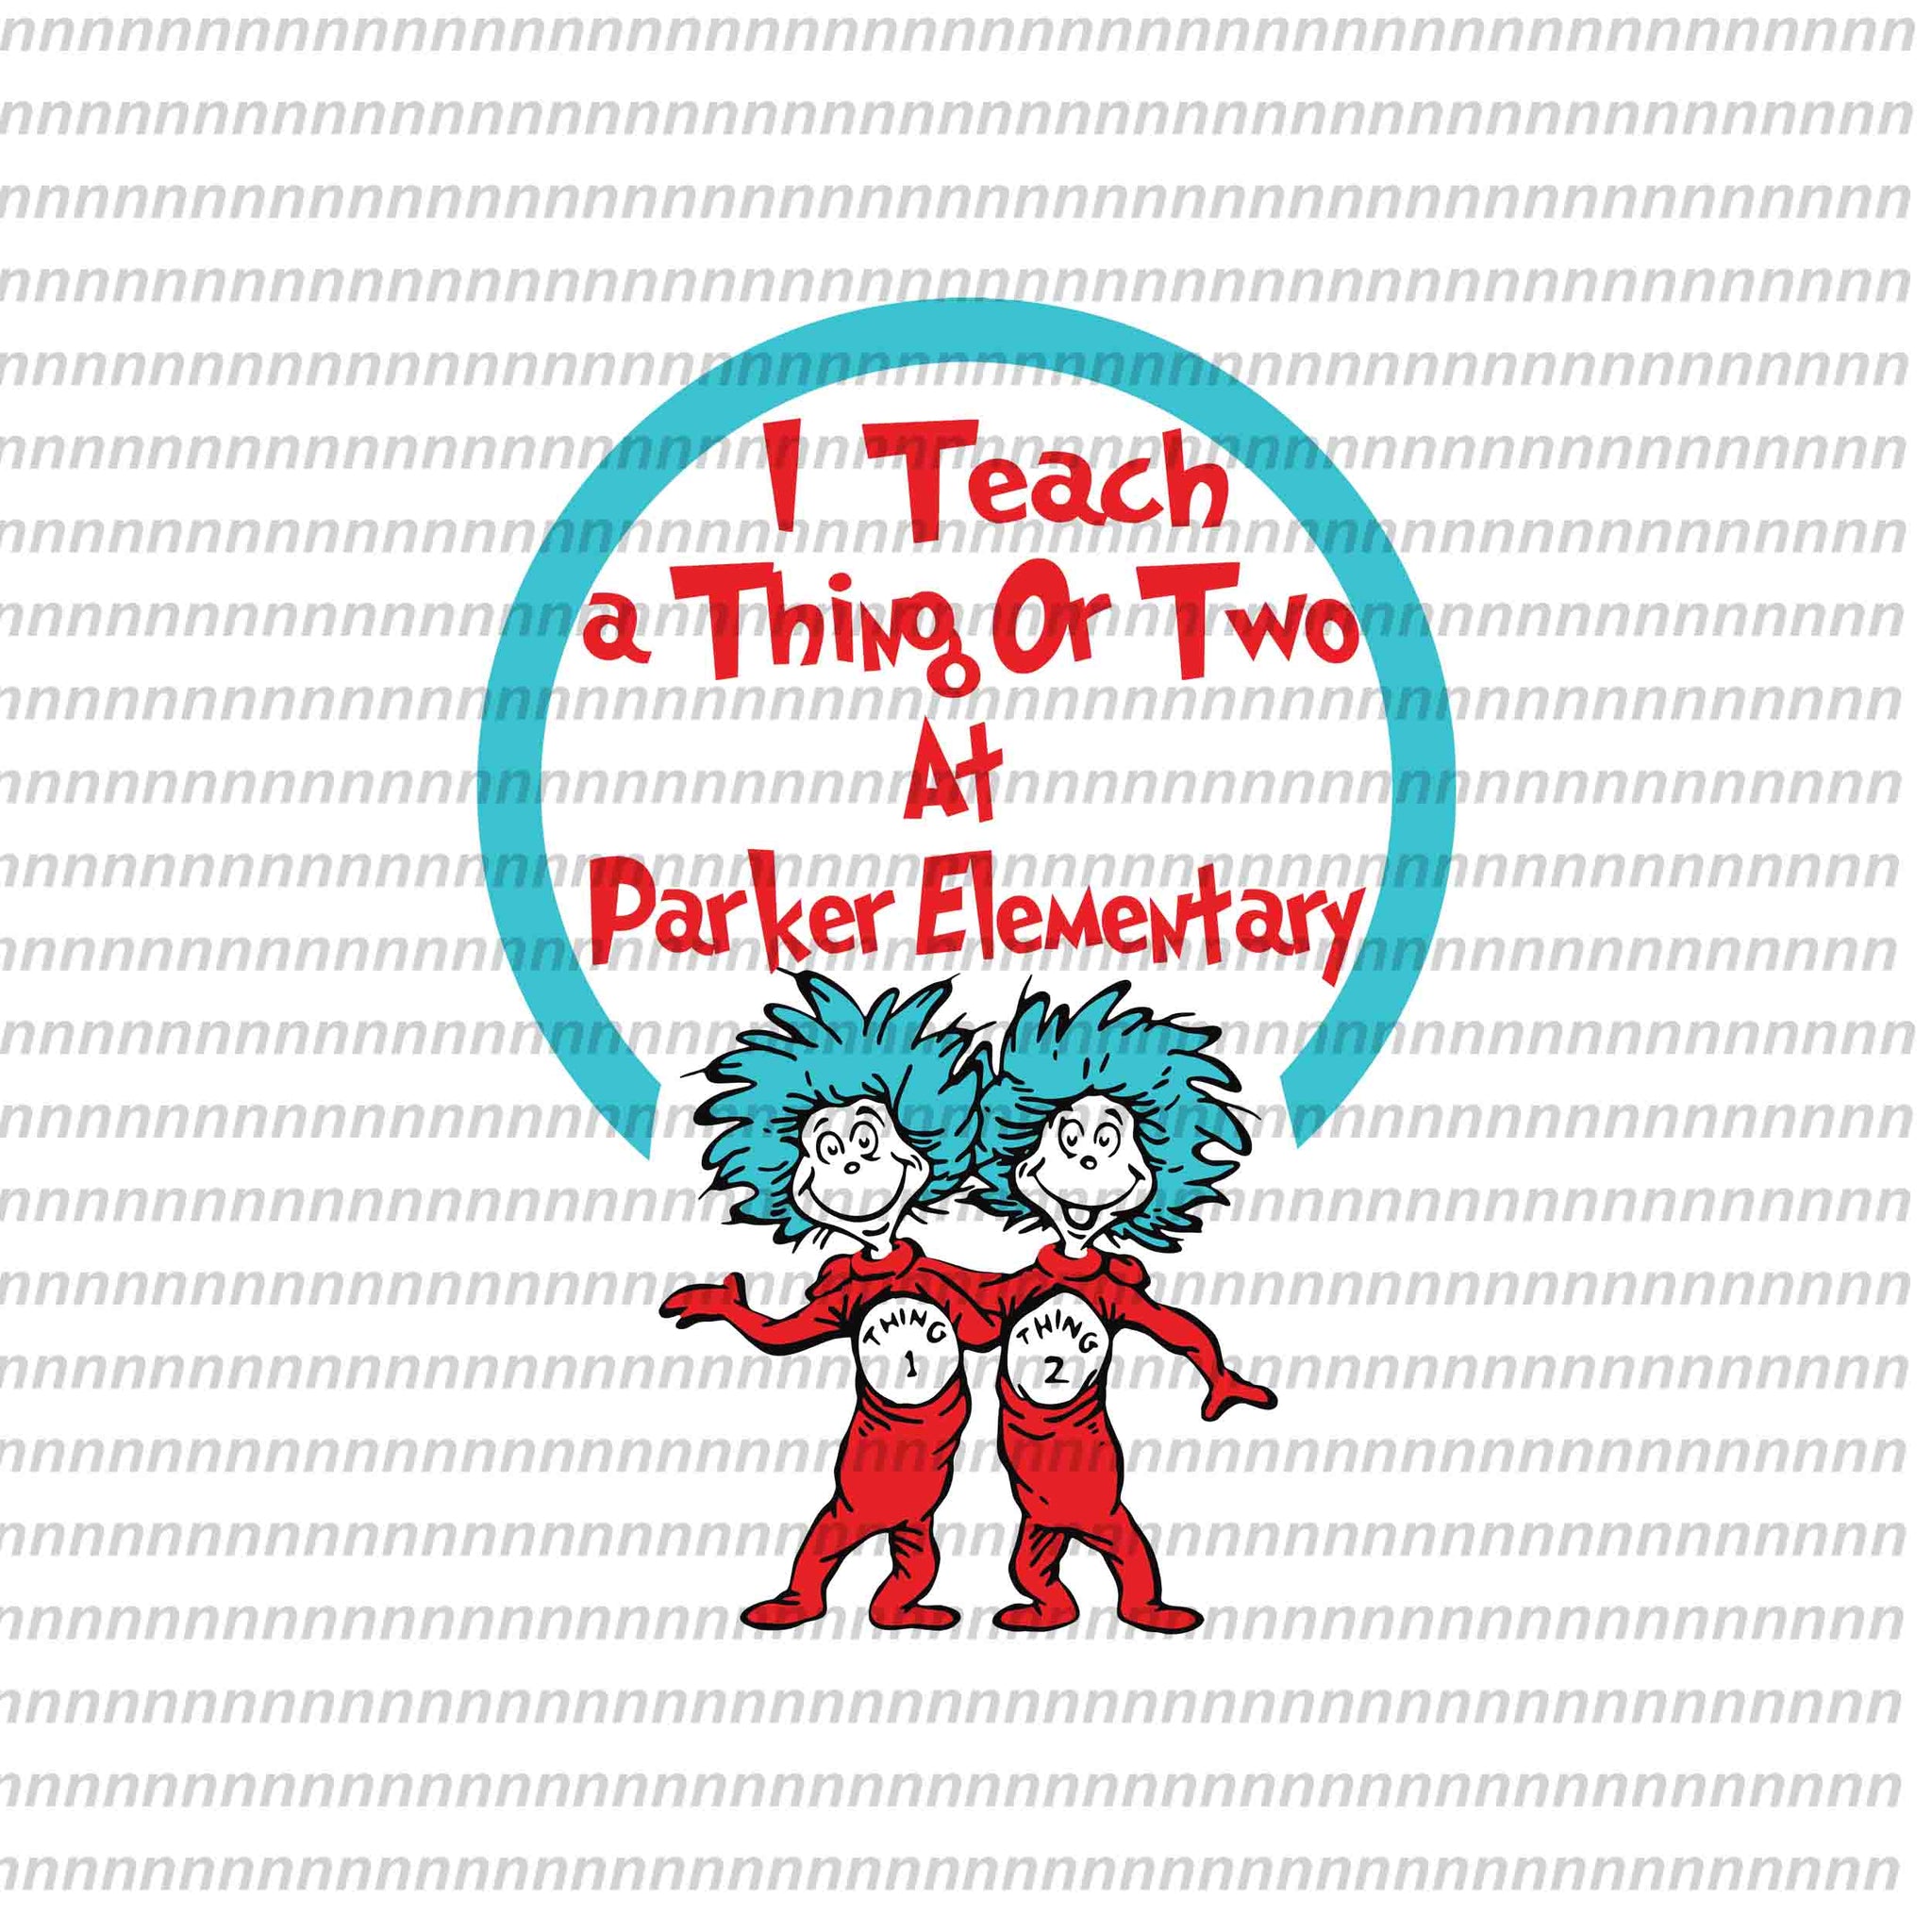 I teach a thing or two at parker elementary, dr seuss svg,dr seuss vector, dr seuss quote, dr seuss design, Cat in the hat svg, thing 1 thing 2 thing 3, svg, png, dxf, eps file